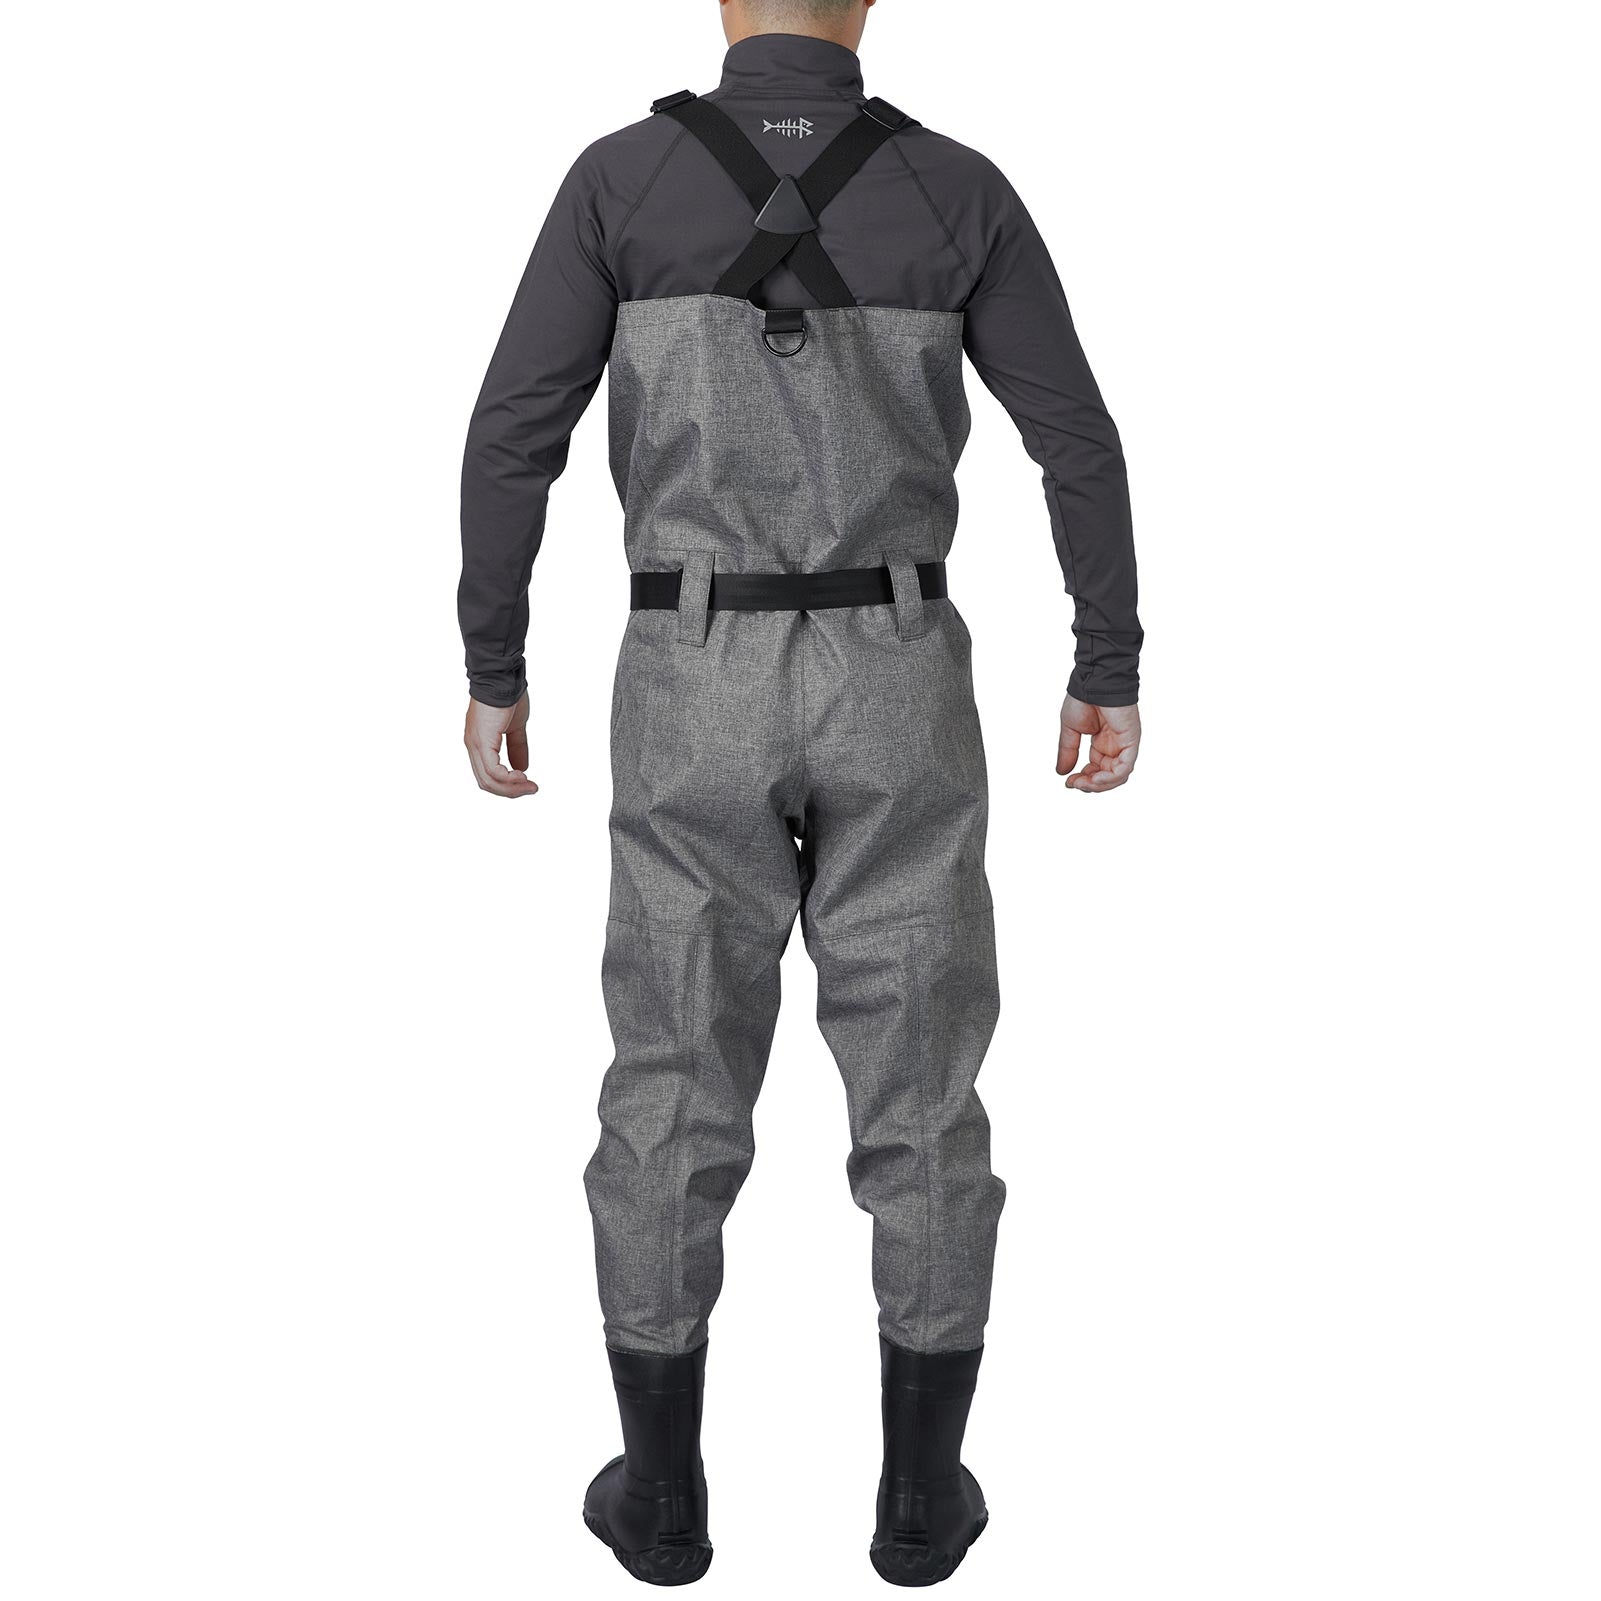 Bassdash IMMERSE Breathable Ripstop Stocking Foot Fishing Hunting Waders  Lightweight Grey Chest Wader for Men Women